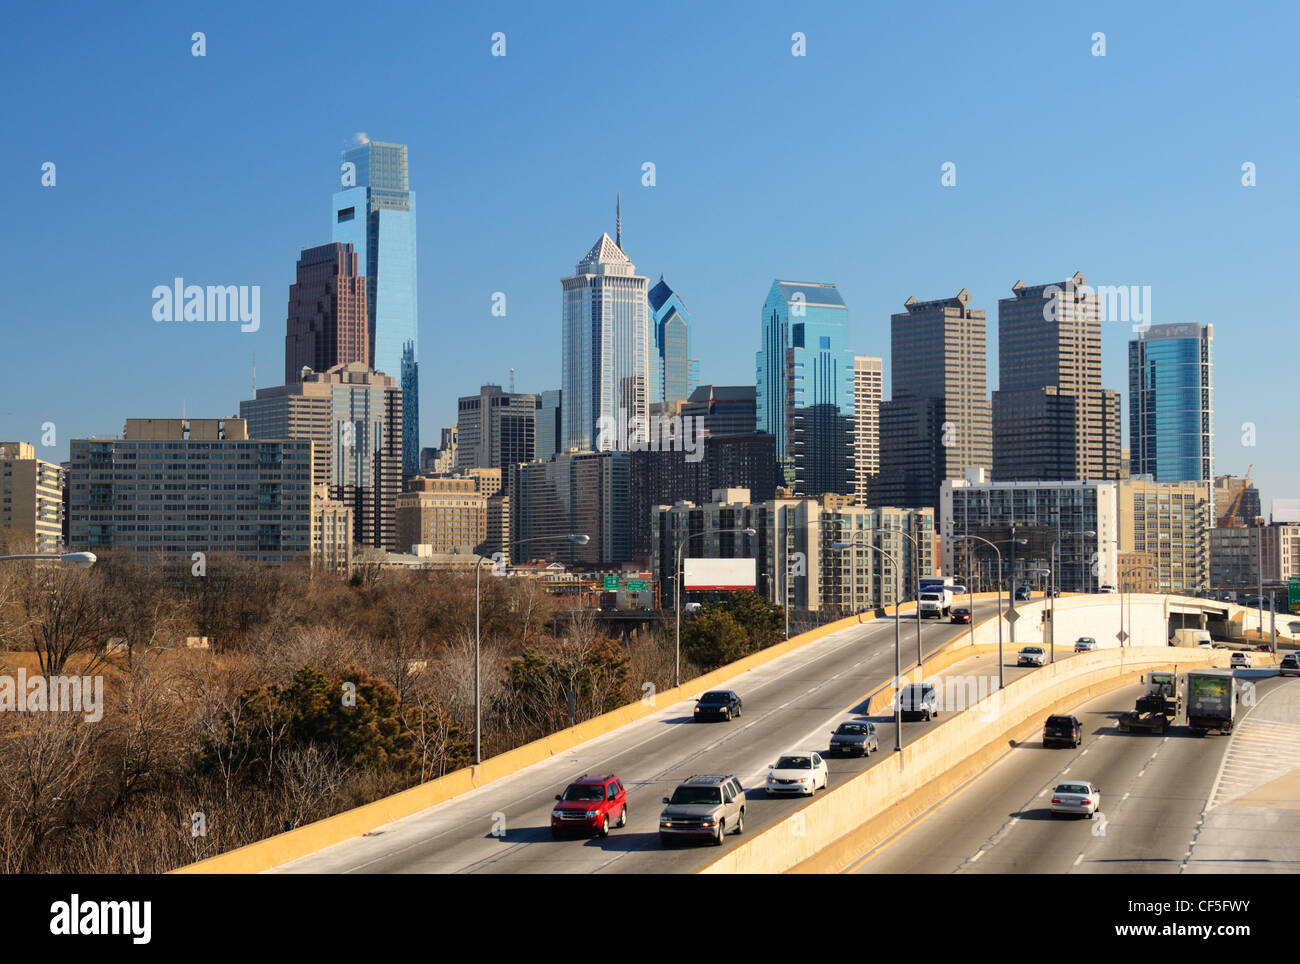 downtown Philadelphia skyline from above the highway Stock Photo